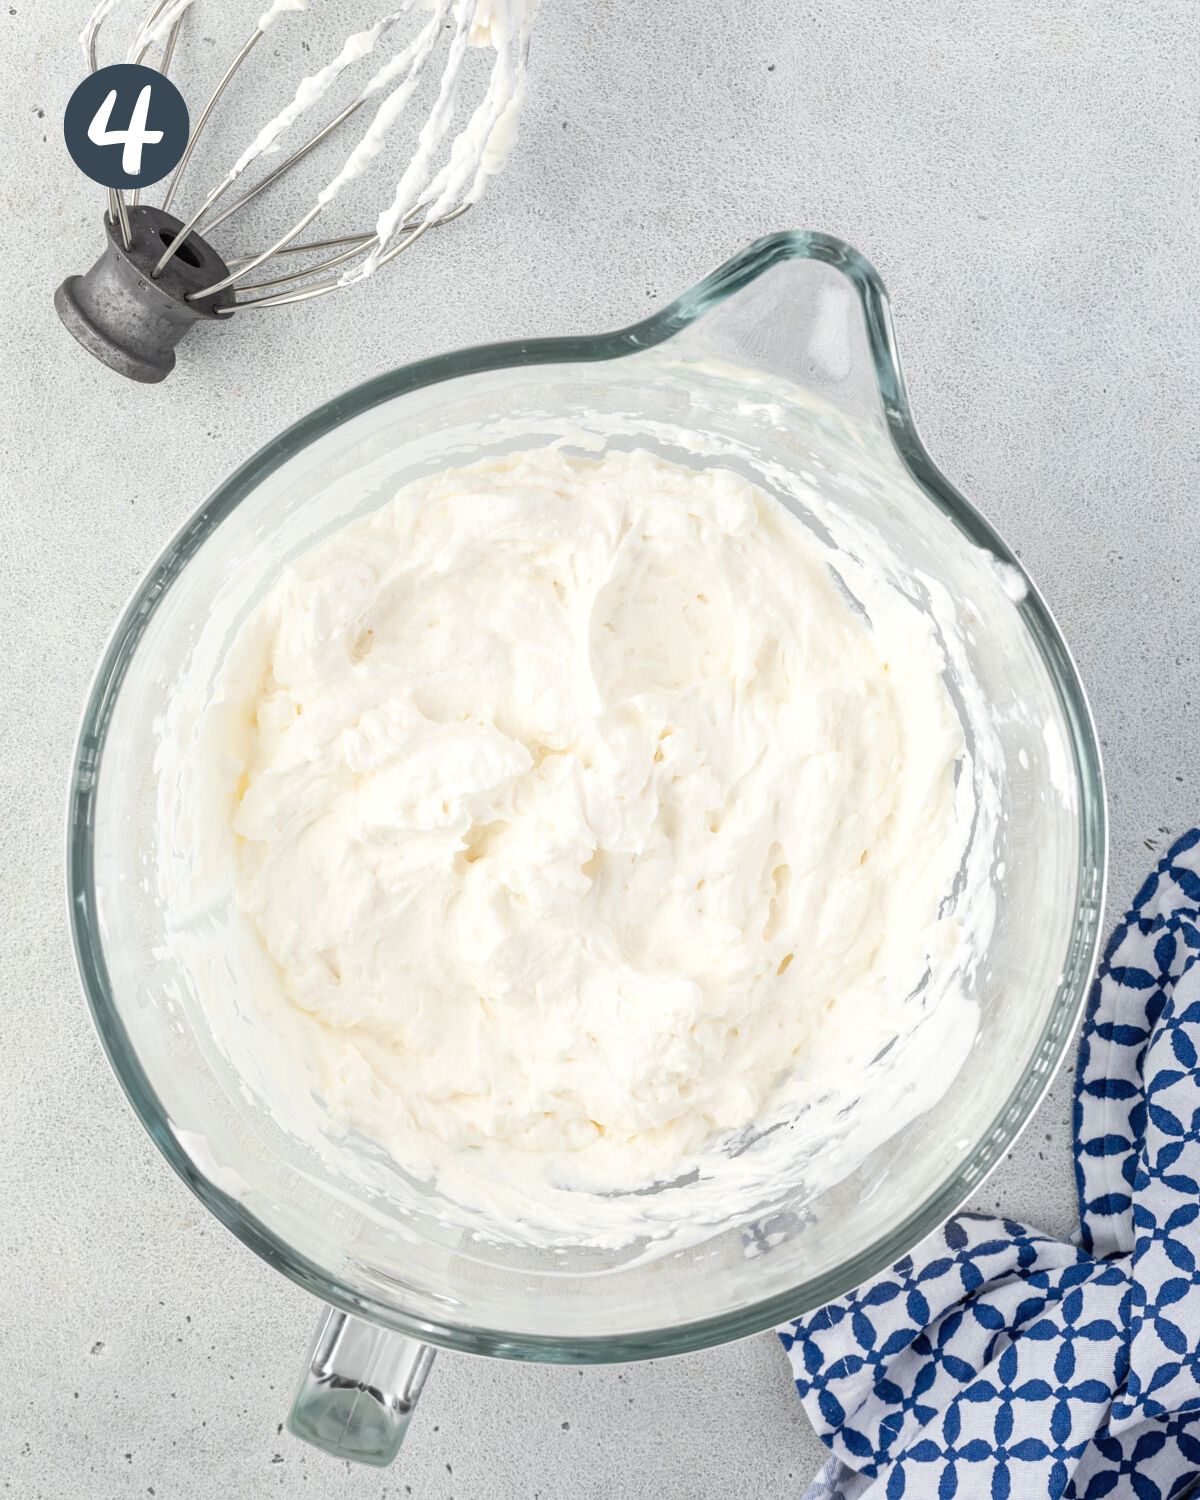 Large mixing bowl with fluffy whipped cream and whisk attachment above it.